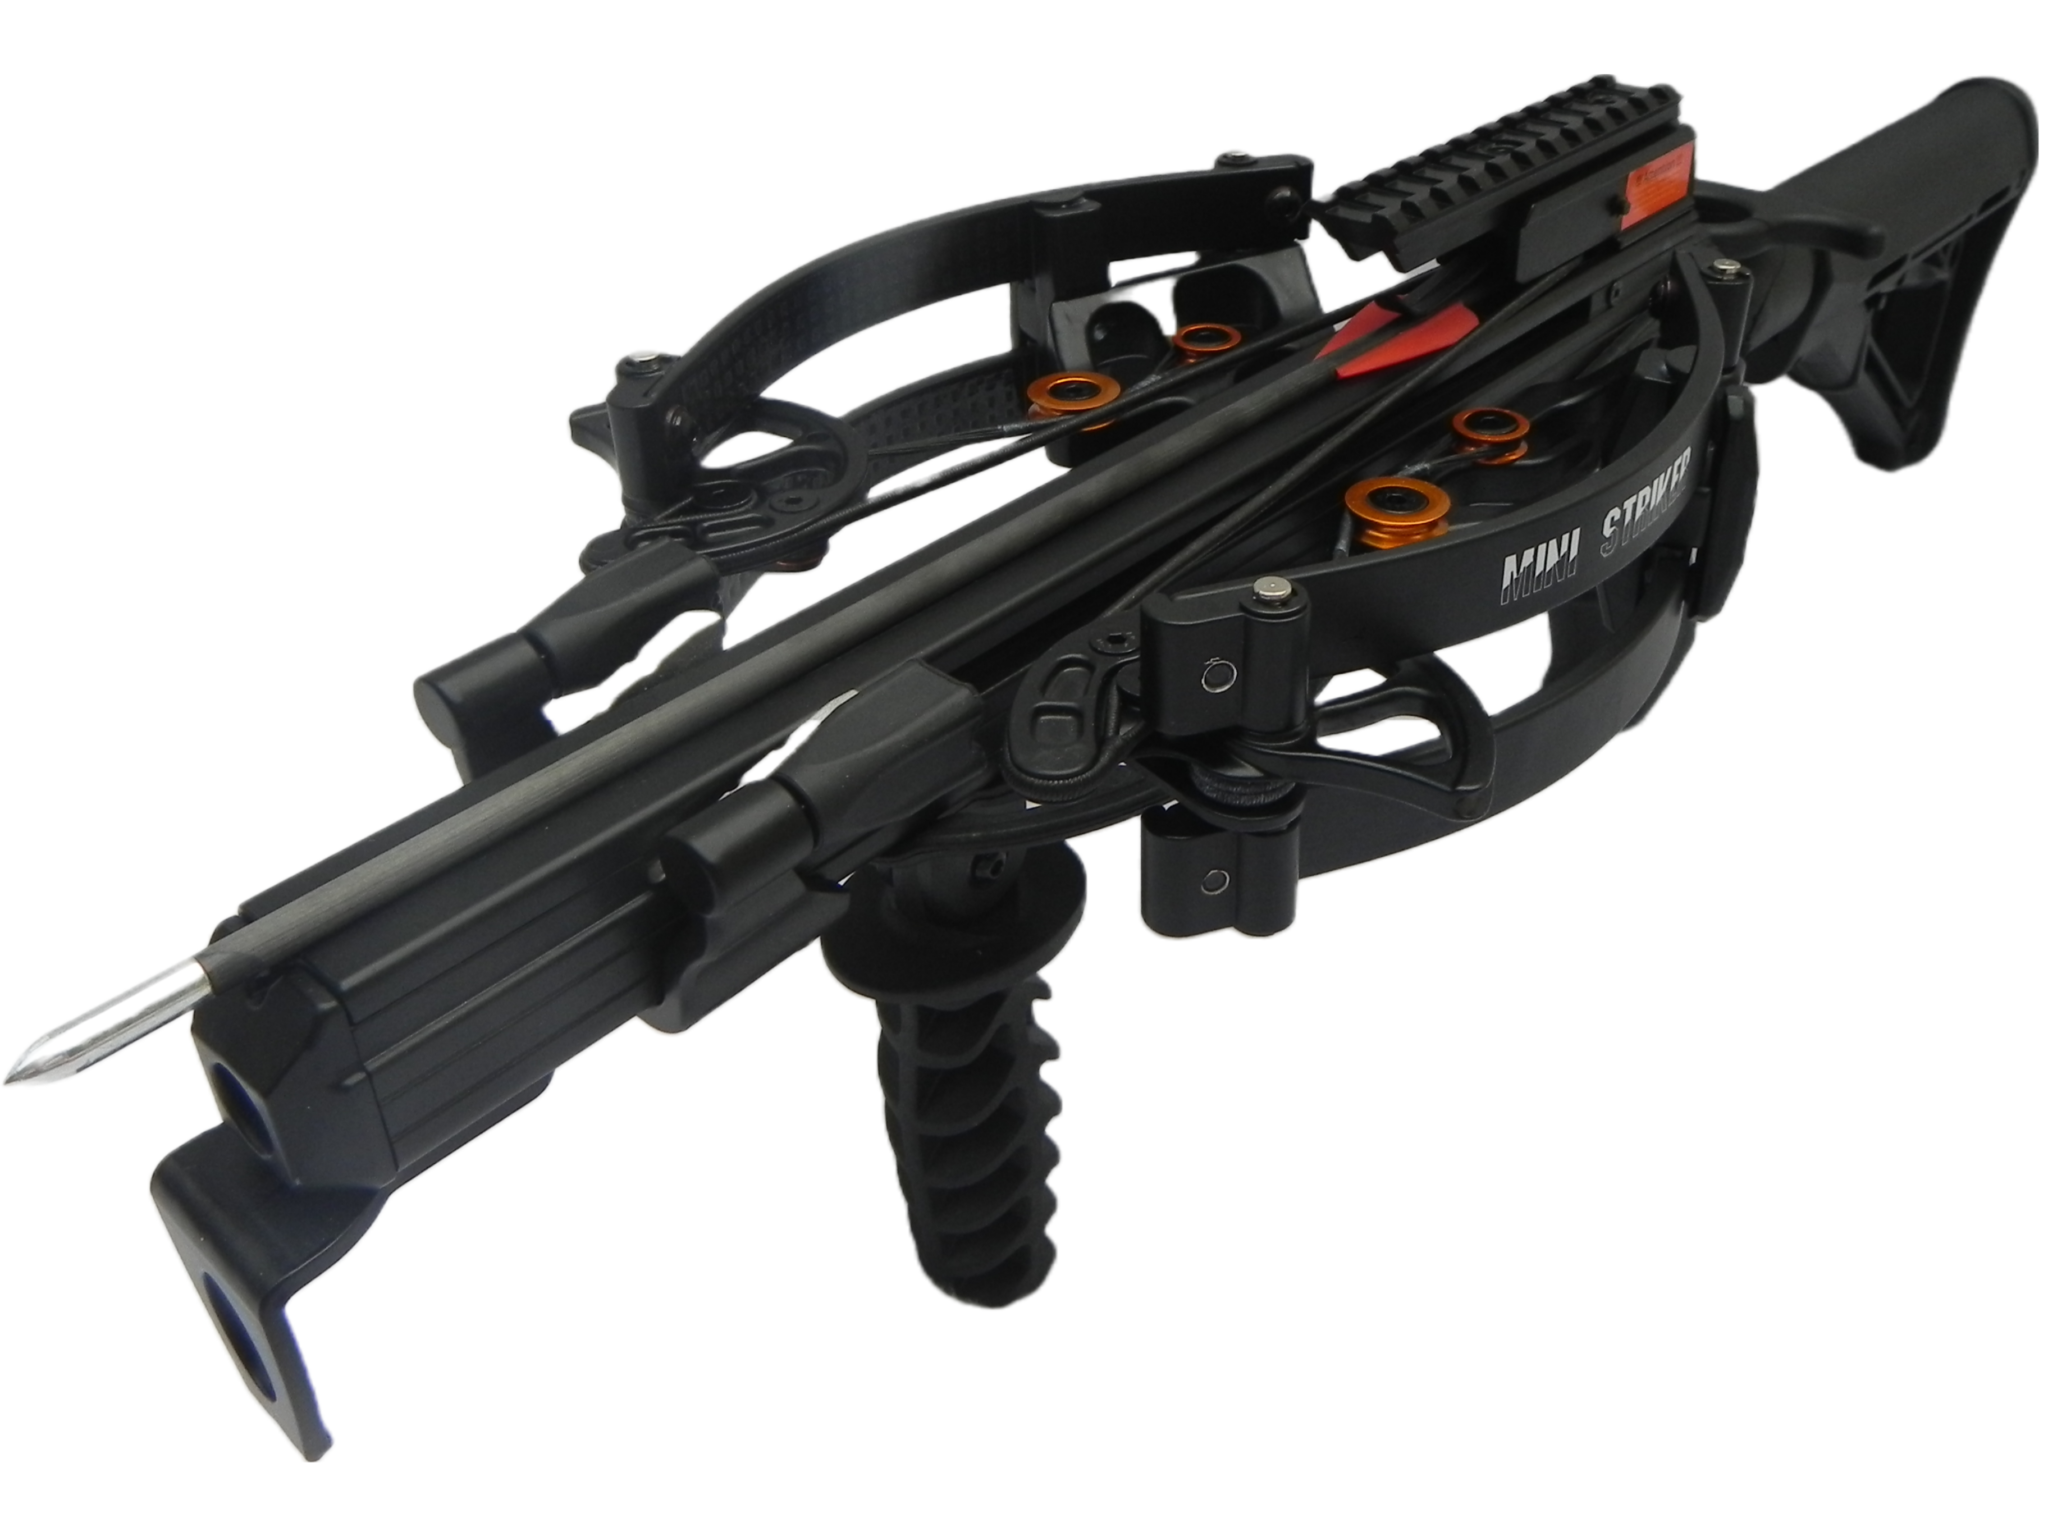 150lbswtMinistrikerreverse draw pistol crossbow with buttstock